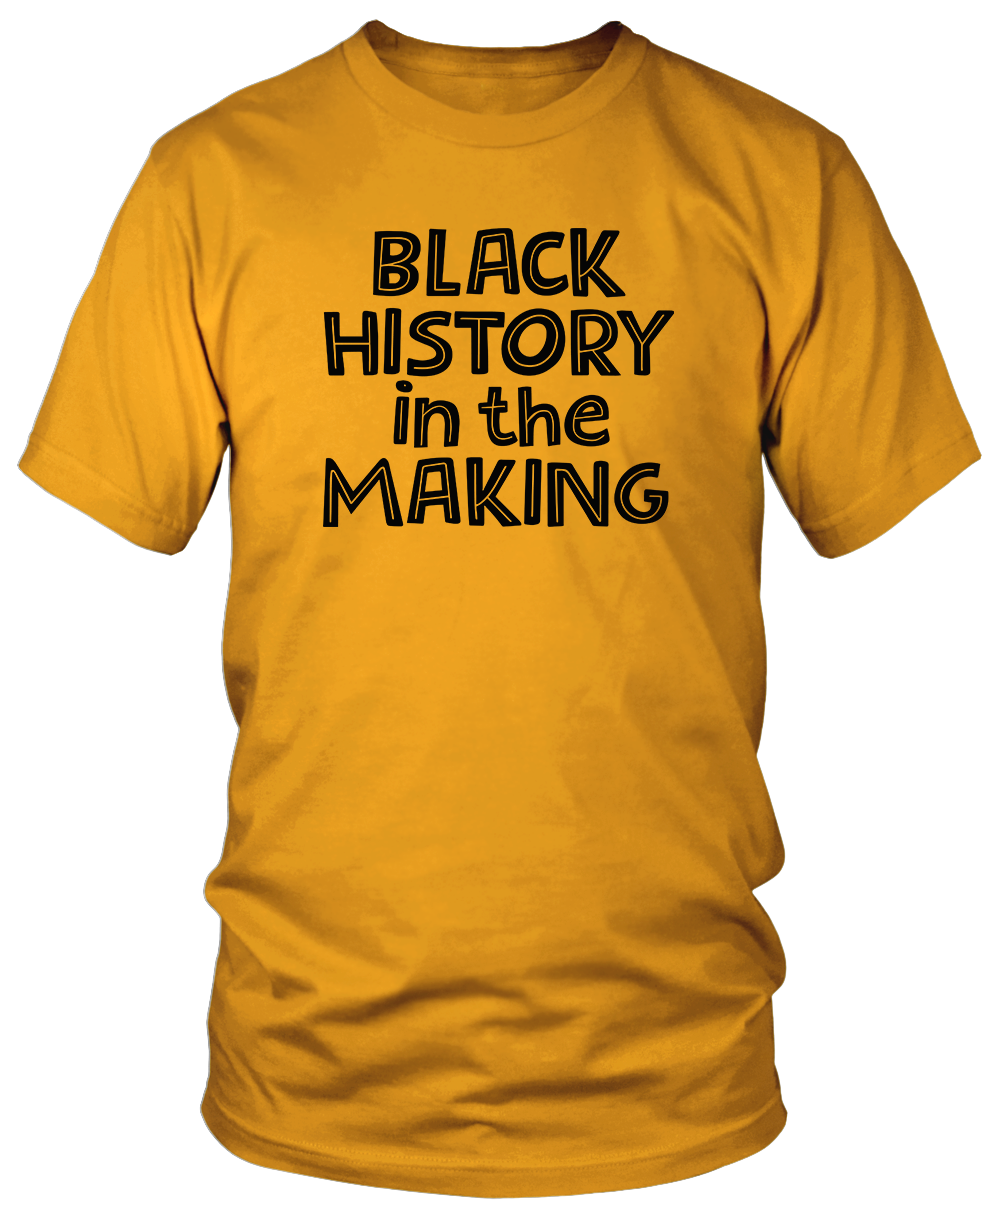 BLACK HISTORY IN THE MAKING T-shirts